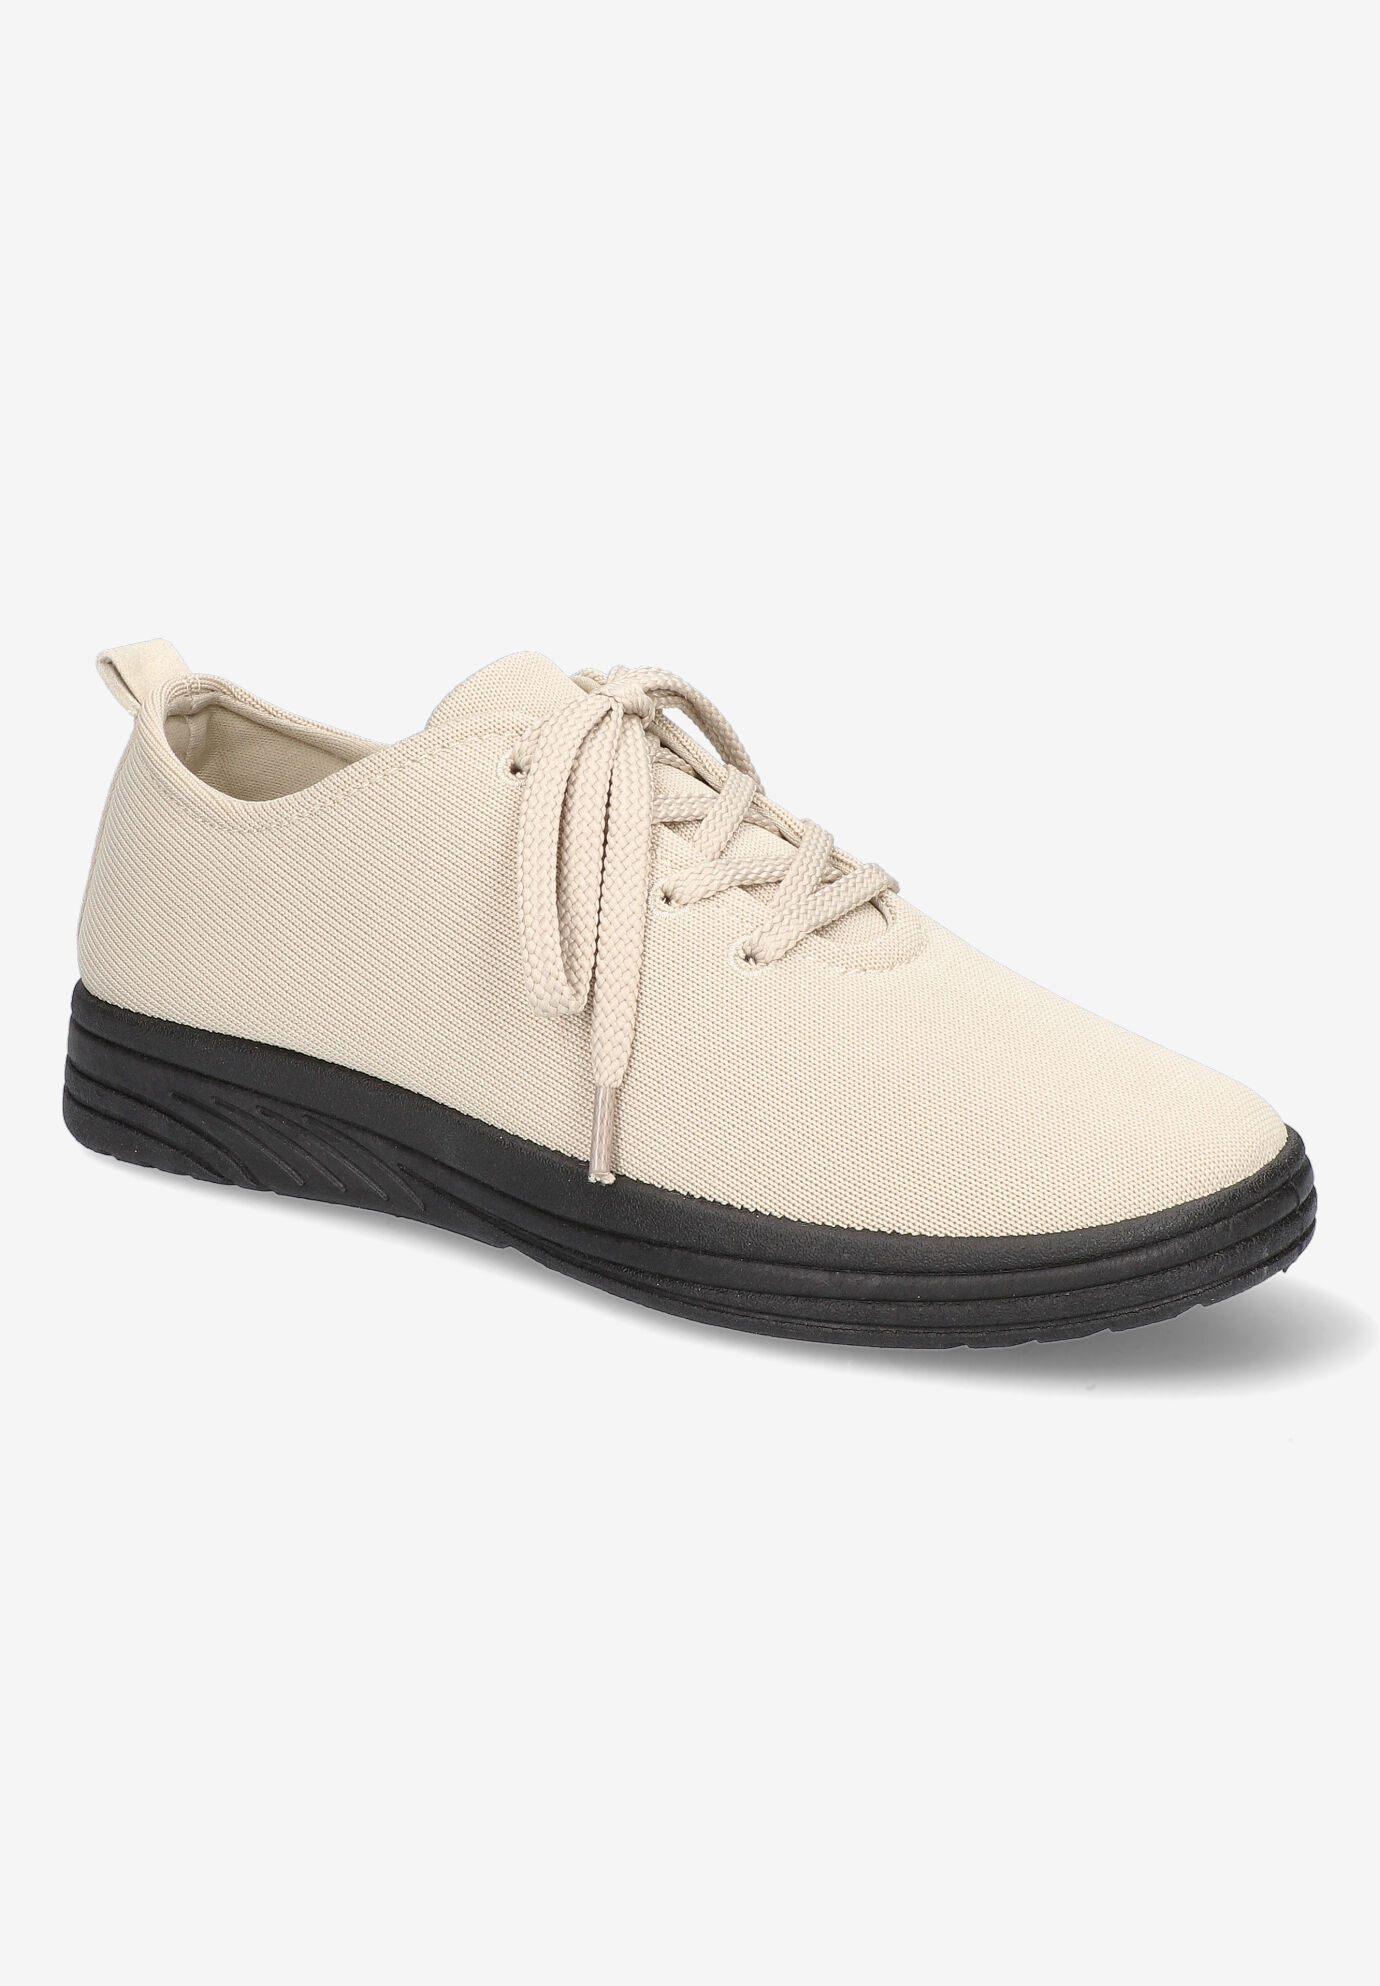 Extra Wide Width Women's Command Sneakers by Easy Street in Natural Knit (Size 7 WW)